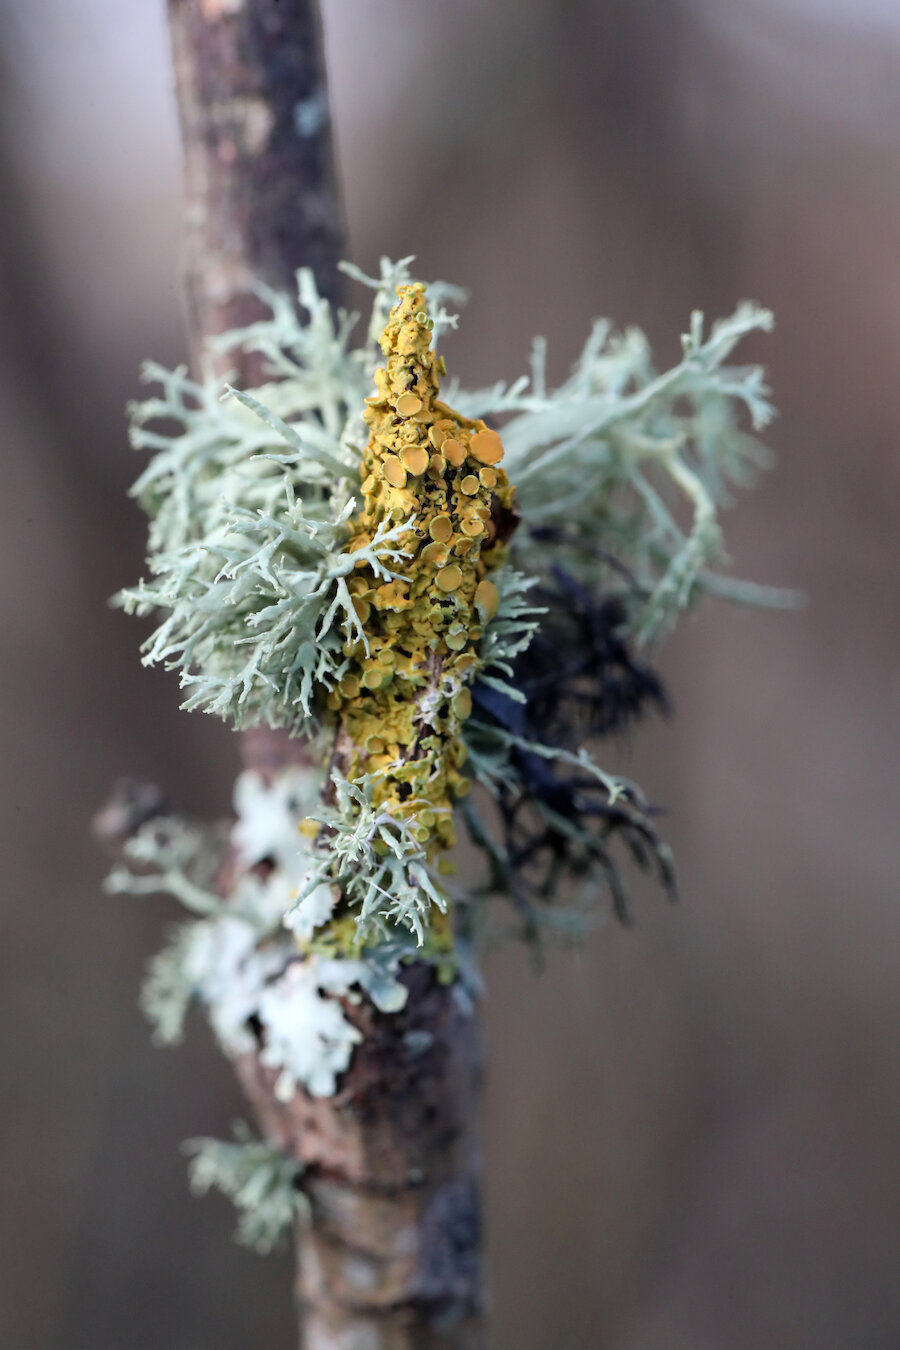 Lichens flourish on trees in Shetland's pollution-free atmosphere